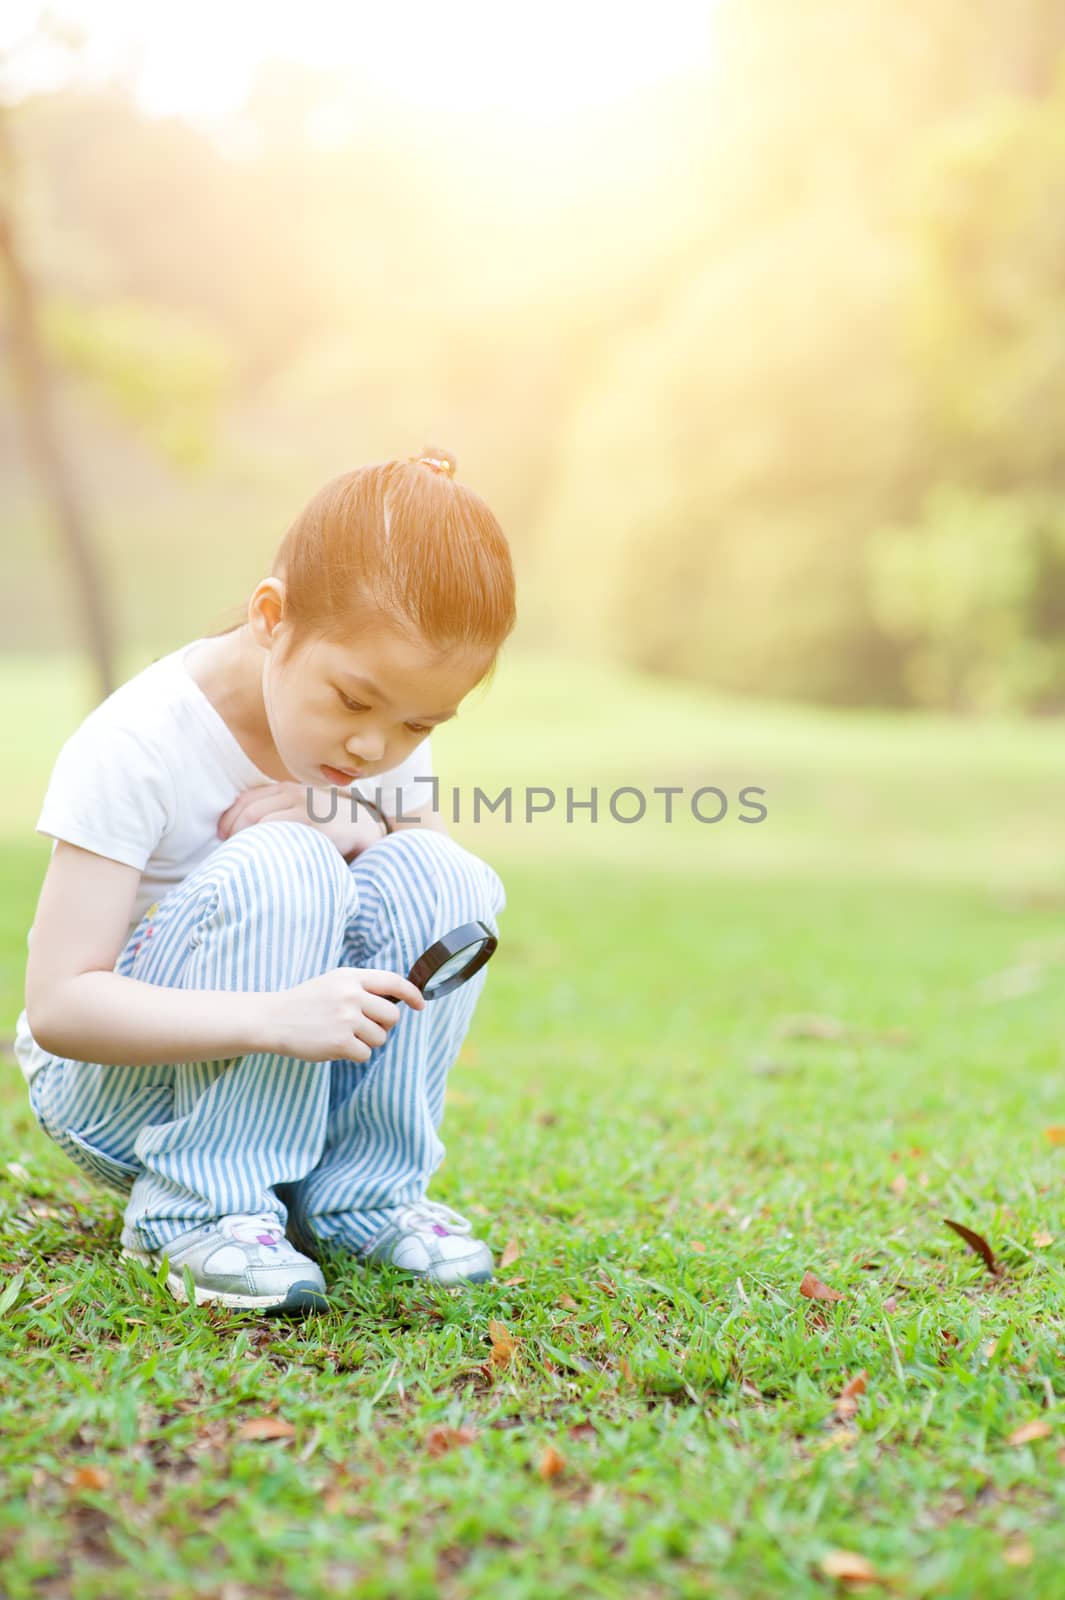 Kid exploring nature with magnifier glass at outdoors. by szefei